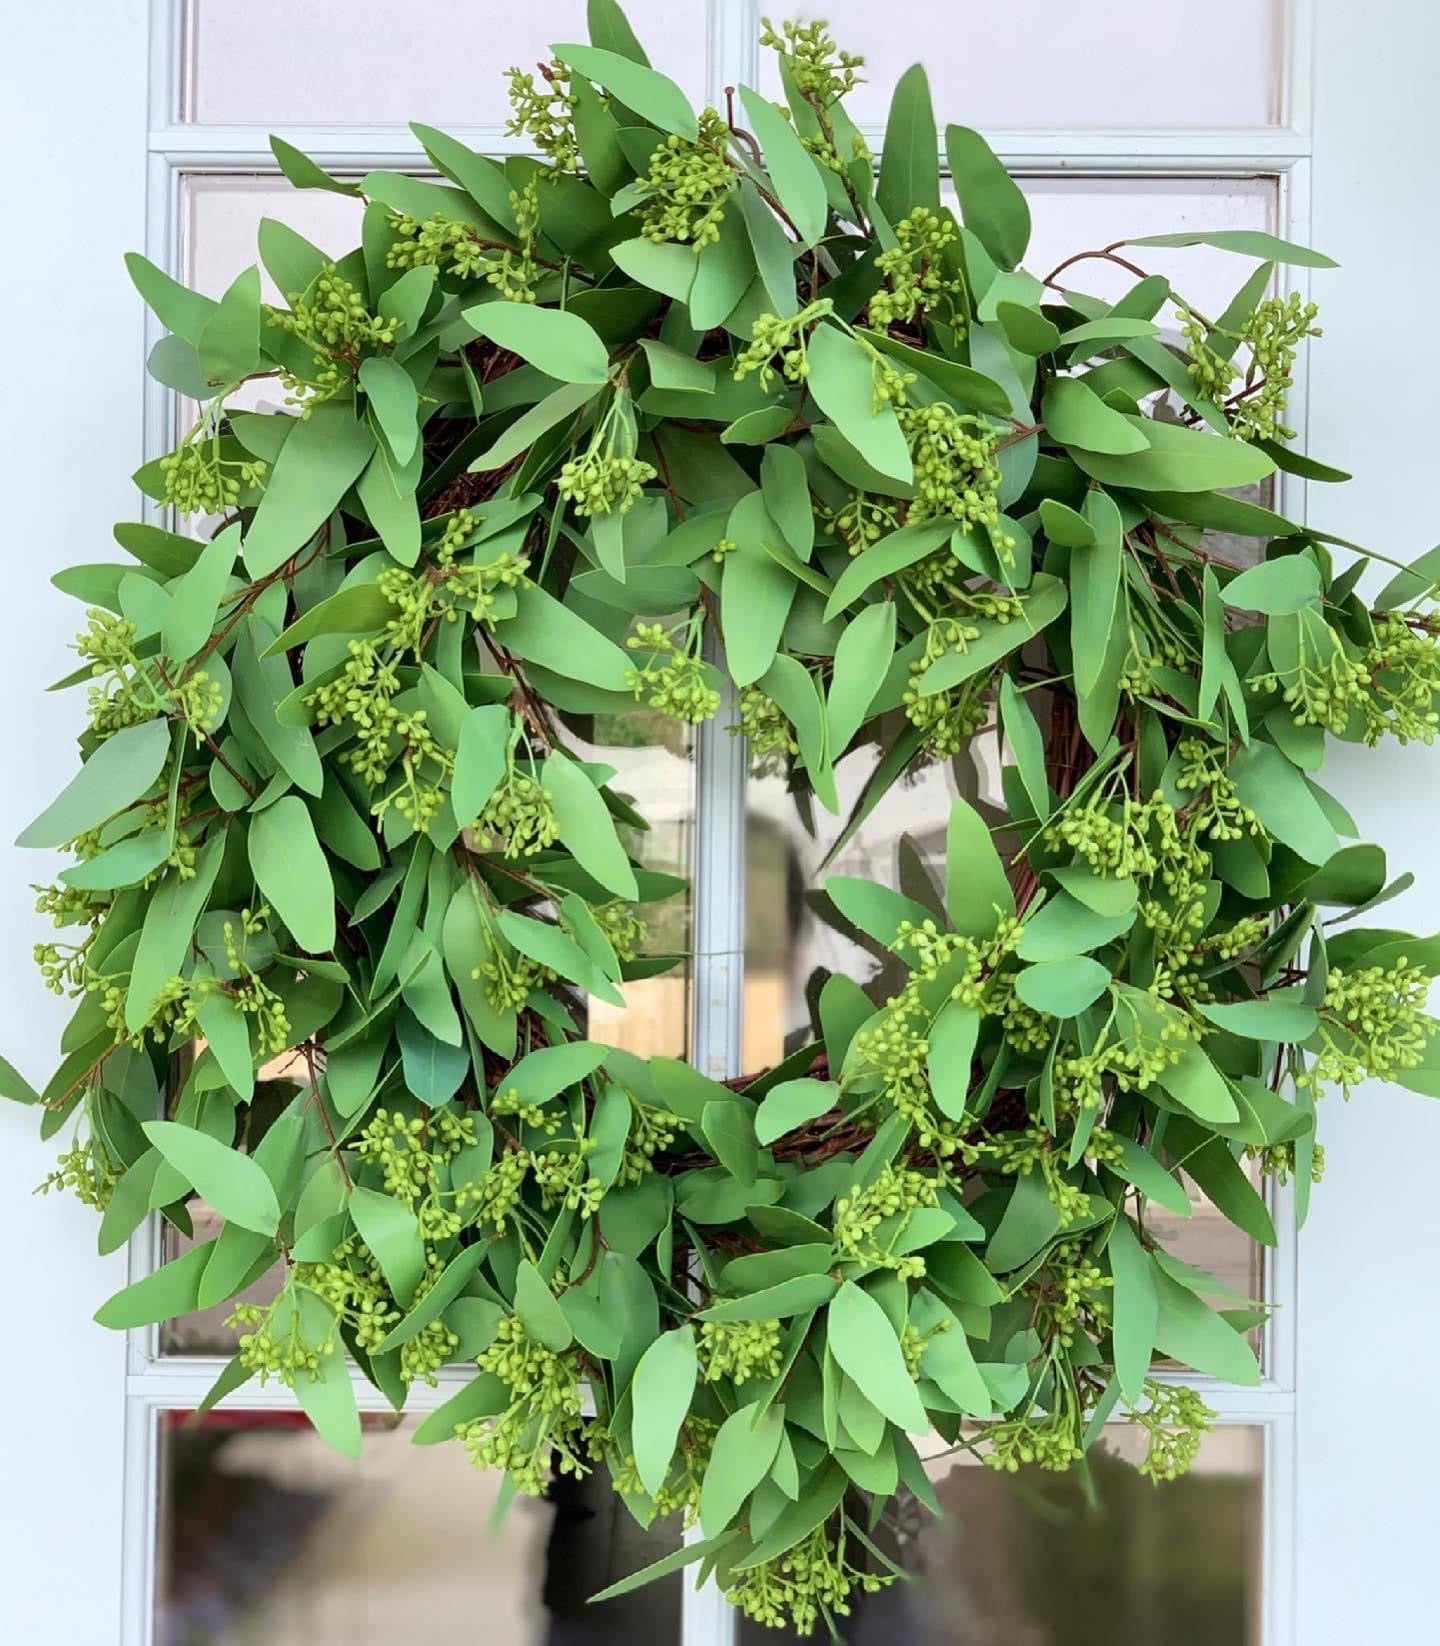 24” Artificial “Real Touch” Long Leaf Eucalyptus Wreath